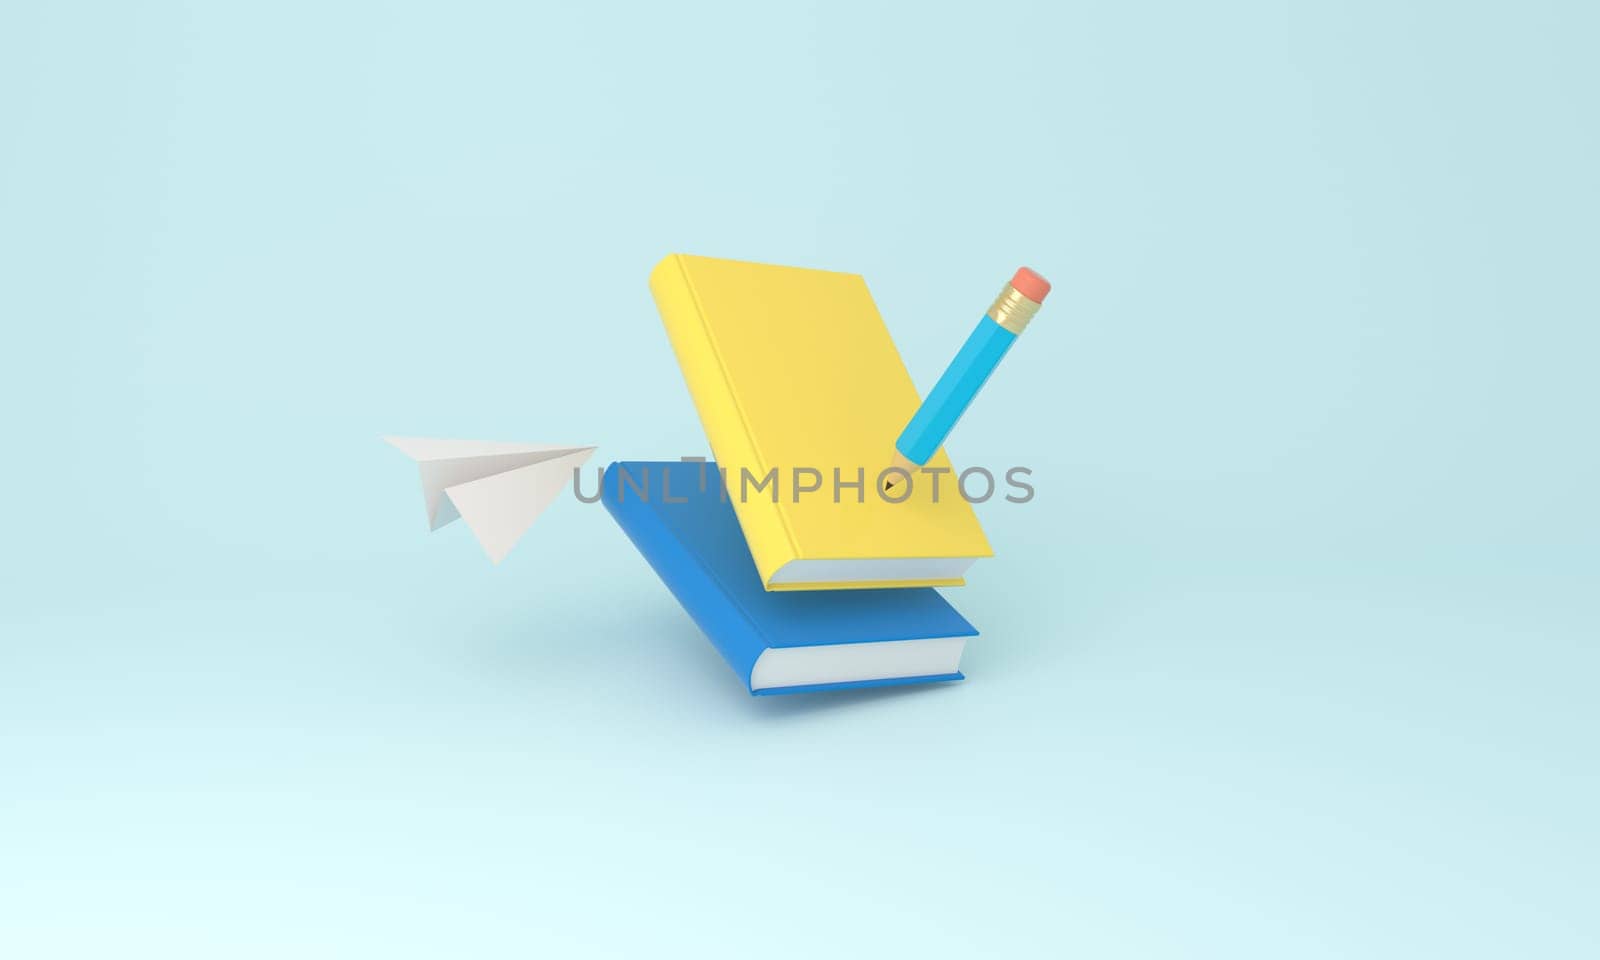 A playful and colorful composition of school supplies with a pencil, books, and a paper plane set on a light blue background. 3D illustration.